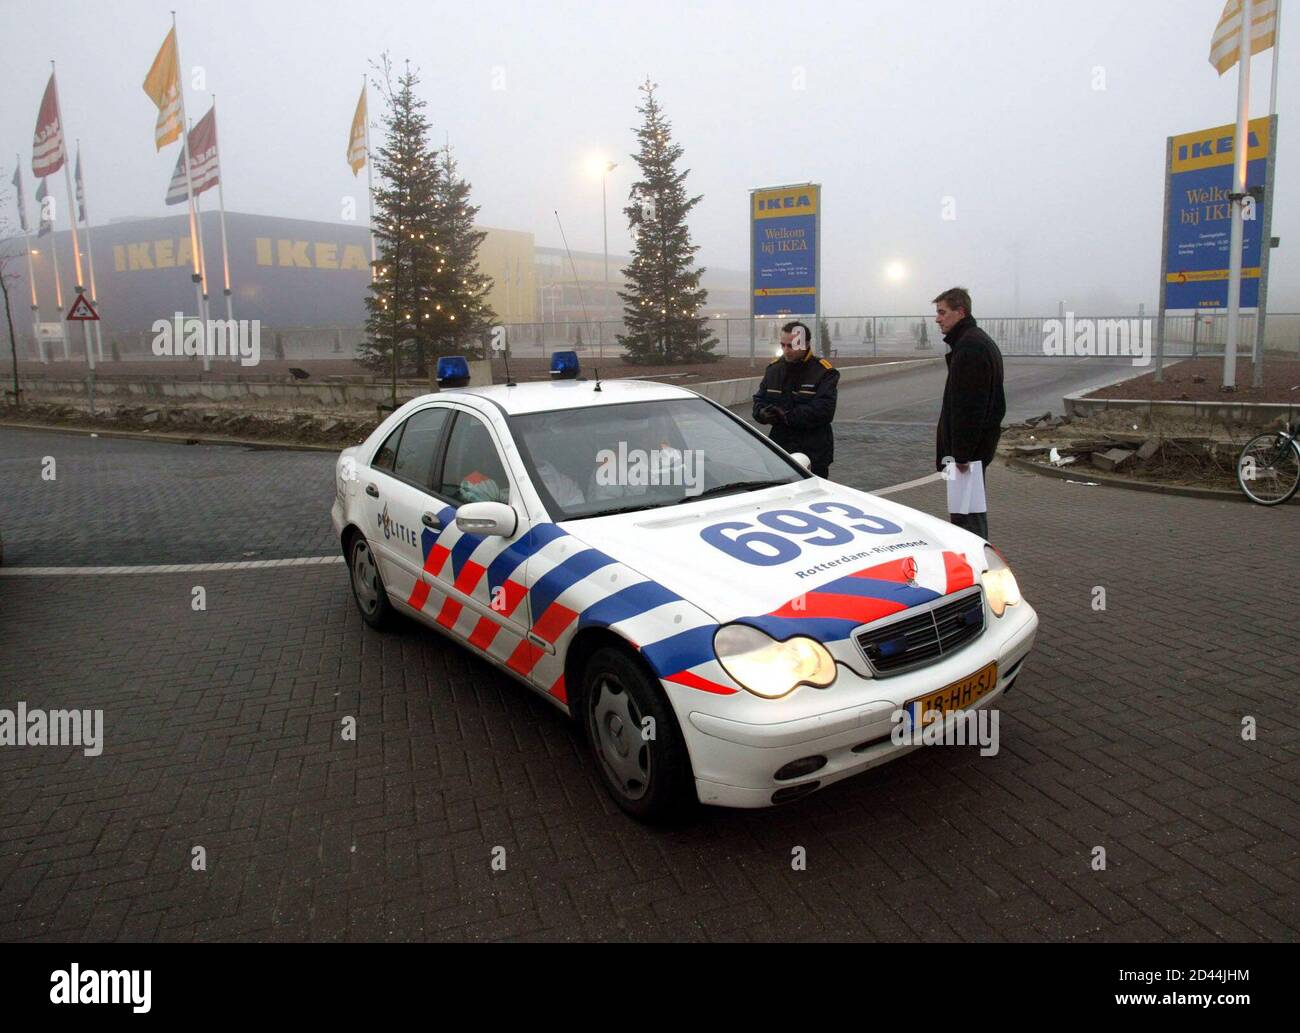 Police guard the entrance to an Ikea store in Barendrecht, near Rotterdam December 4, 2002. Police were searching 10 IKEA home furnishing stores in the Netherlands for bombs on Wednesday after explosive devices were found at branches of the world's biggest furniture retailer. All IKEA's Dutch stores were closed and its 4,000 employees told to stay home after bombs were found and defused at its stores in Amsterdam and Sliedrecht in the southwest of the country on Tuesday, police and a company spokeswoman said. REUTERS/ Guido Benschop  GDB/JDP Stock Photo